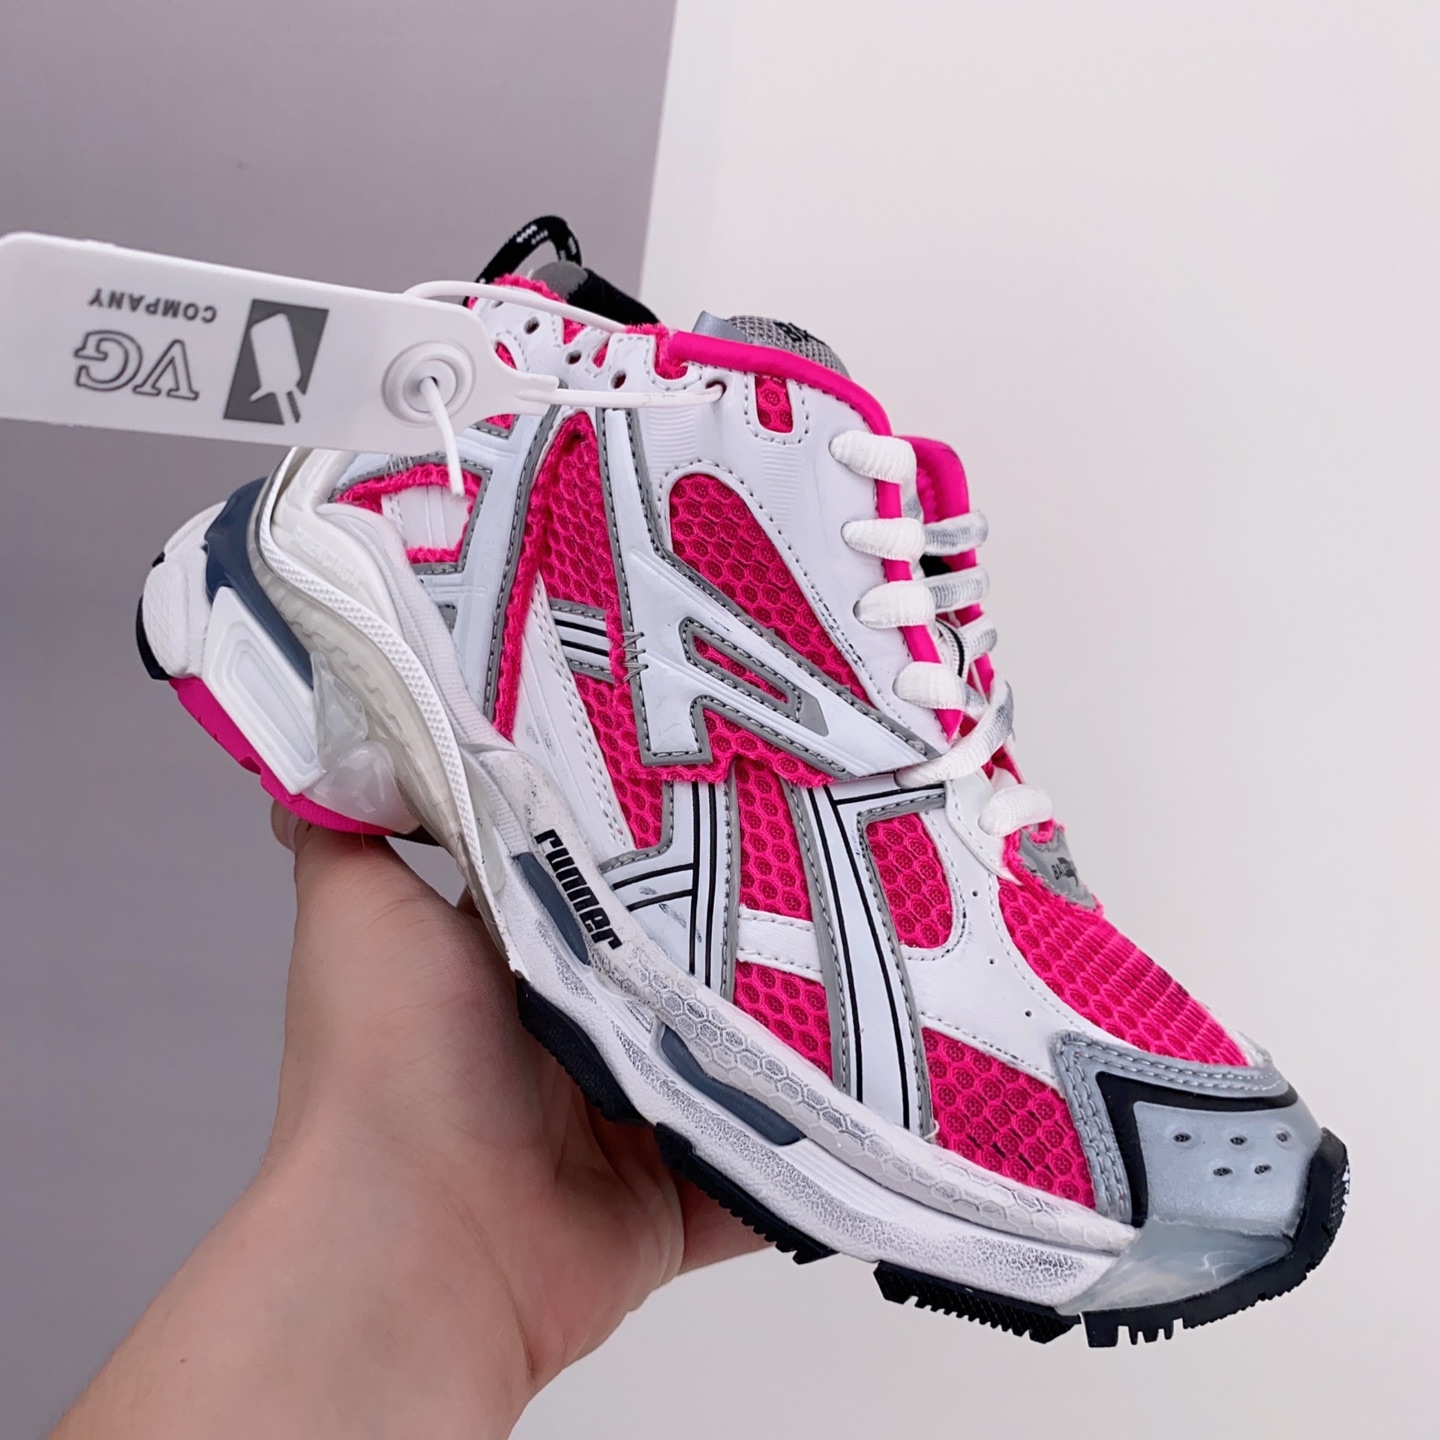 Balenciaga Wmns Runner Sneaker 'White Neon Pink' 677402 W3RBN 9155 - Stylish and Vibrant Women's Shoes